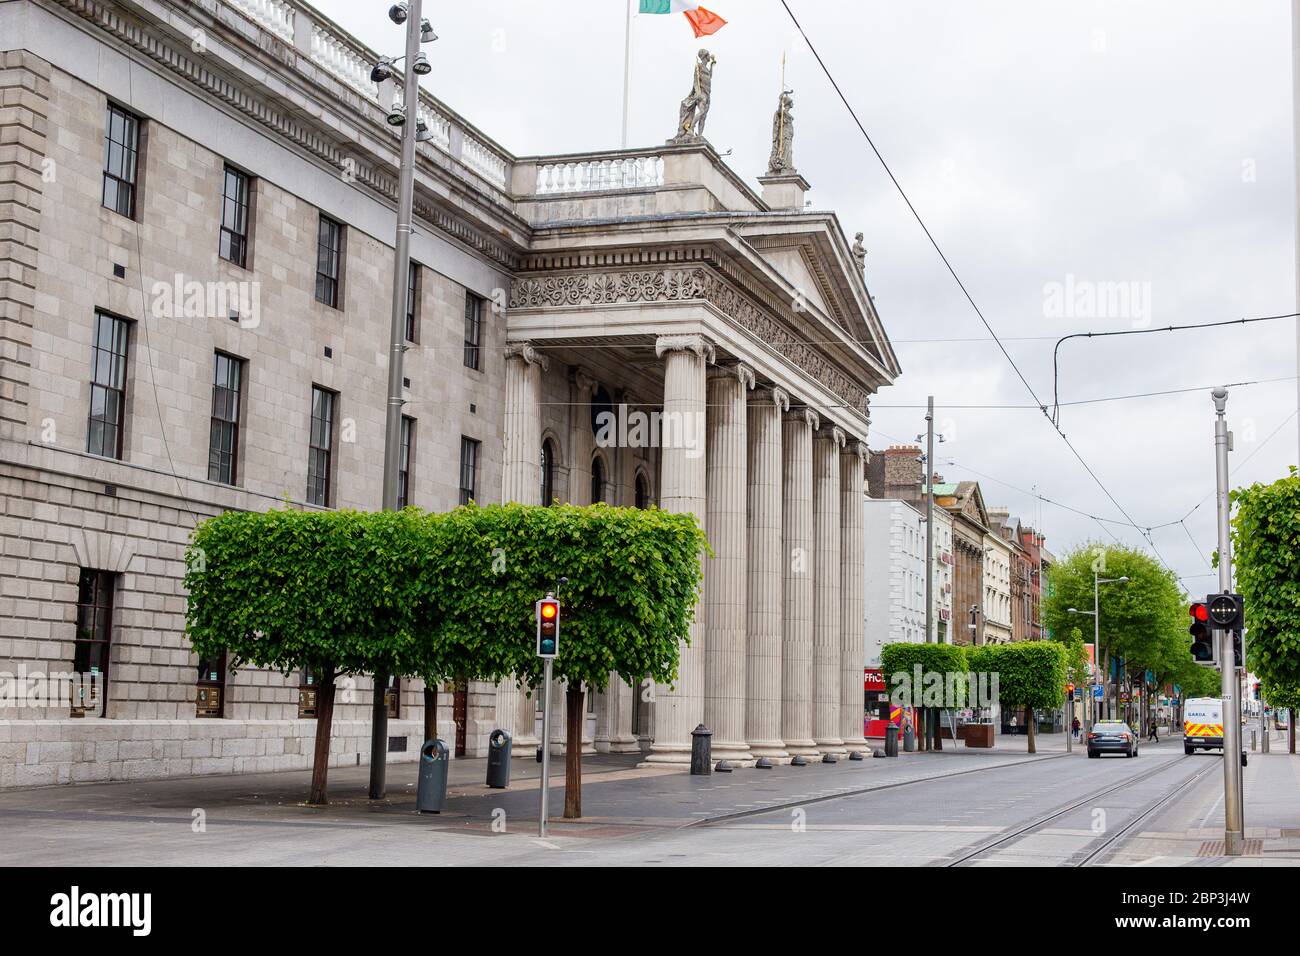 Dublin, Ireland. May 2020. Limited footfall and traffic on O`Connell St in Dublin as shops and businesses closed due to Covid-19 pandemic restrictions Stock Photo